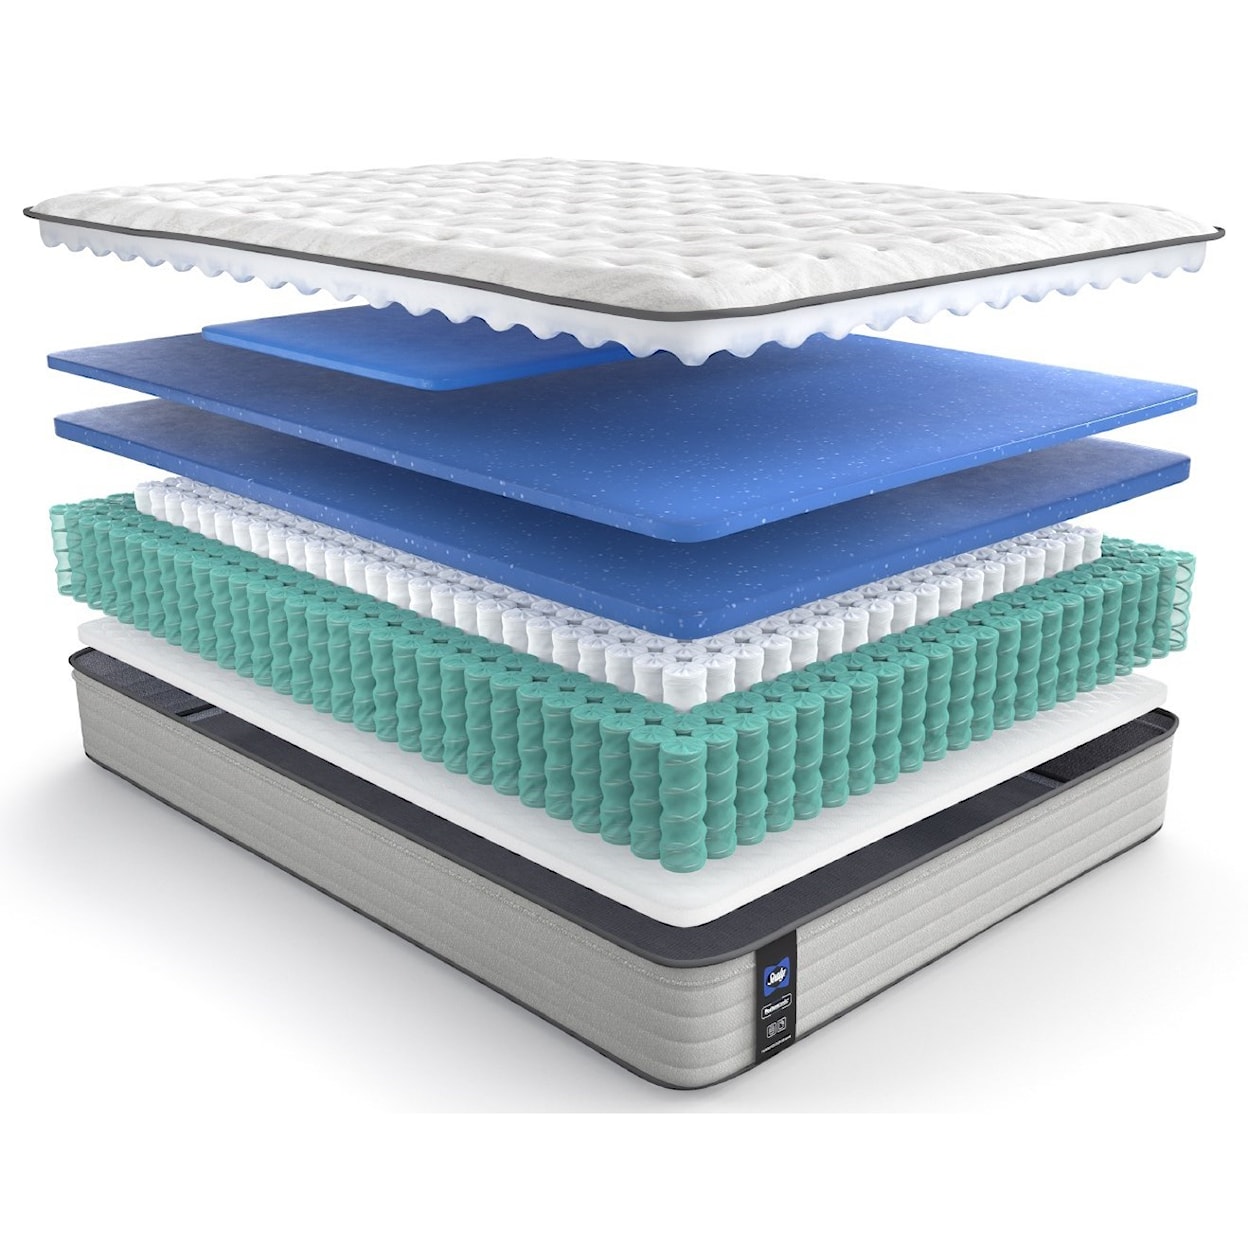 Sealy PPS3 Posturpedic Innerspring Firm FXET Twin 13" Firm FXET Mattress